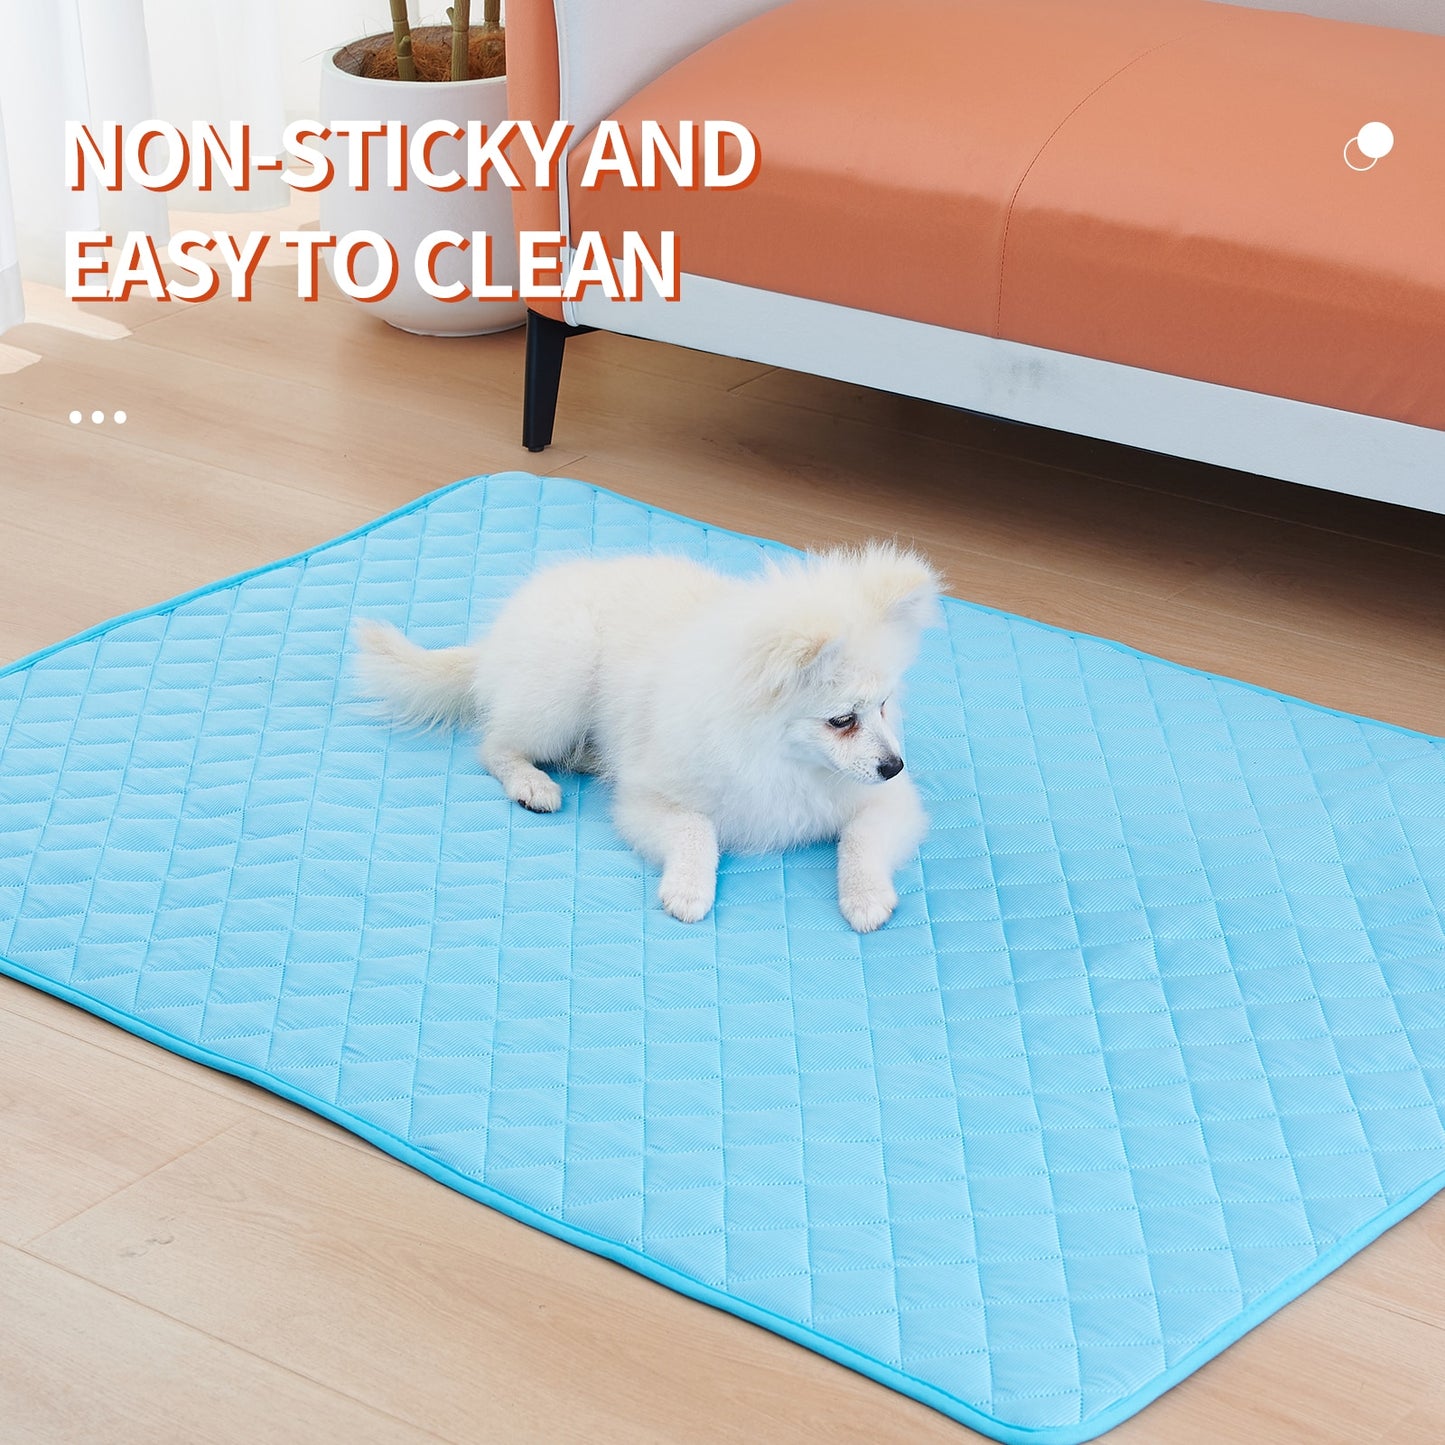 Pet Cooling Bed, Summer Pet Pad that is Breathable and Washable 8 Sizes.